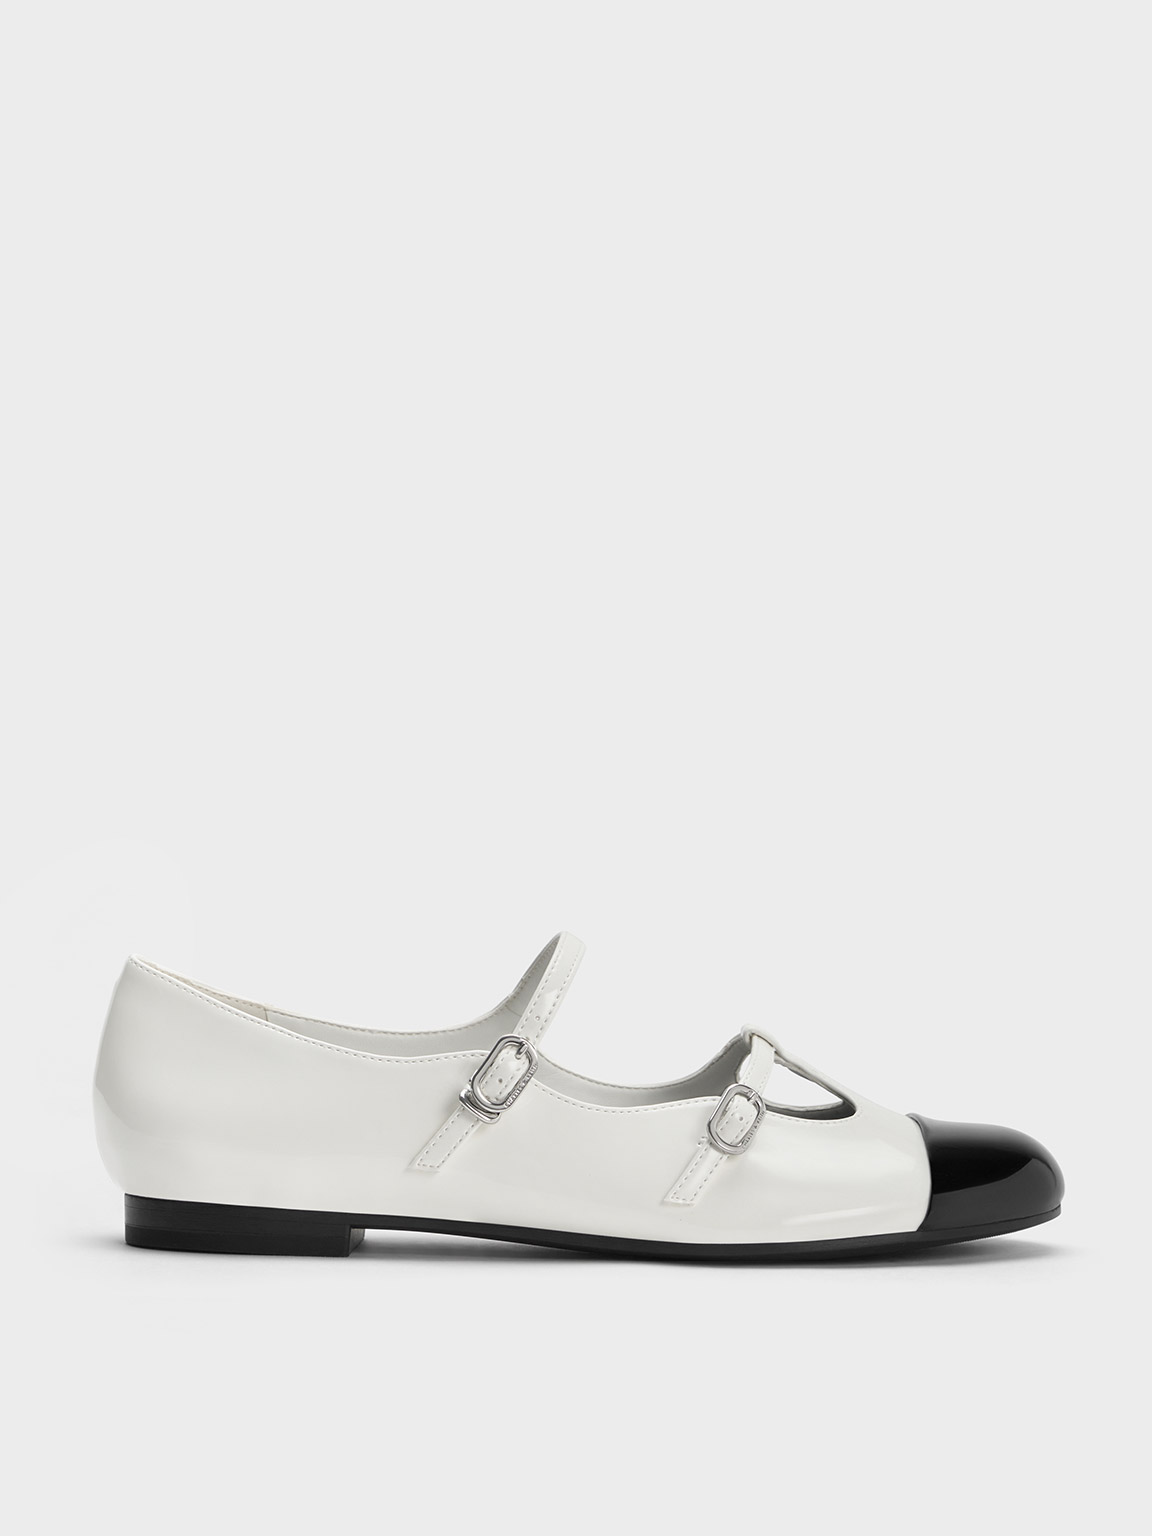 Charles & Keith - Women's Double-Strap T-Bar Mary Janes, White, US 10